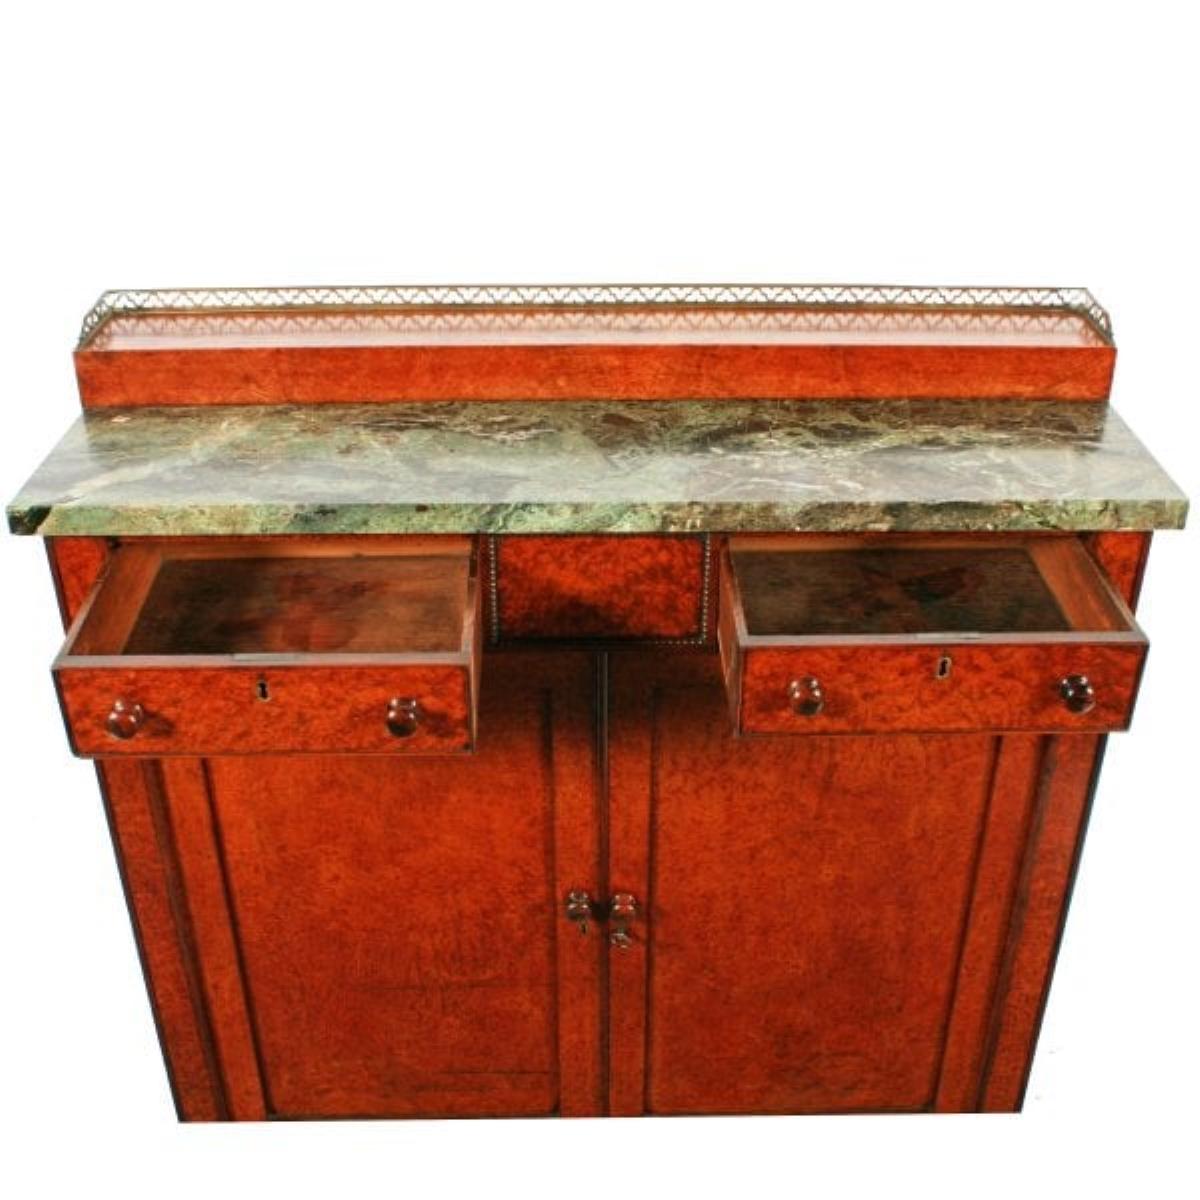 Regency Amboyna & Rosewood side cabinet

An unusual amboyna veneered Regency marble top side cabinet.

The cabinet has rosewood mouldings throughout and mahogany linings to the drawers.

The pair of cabinet doors have recessed panels and